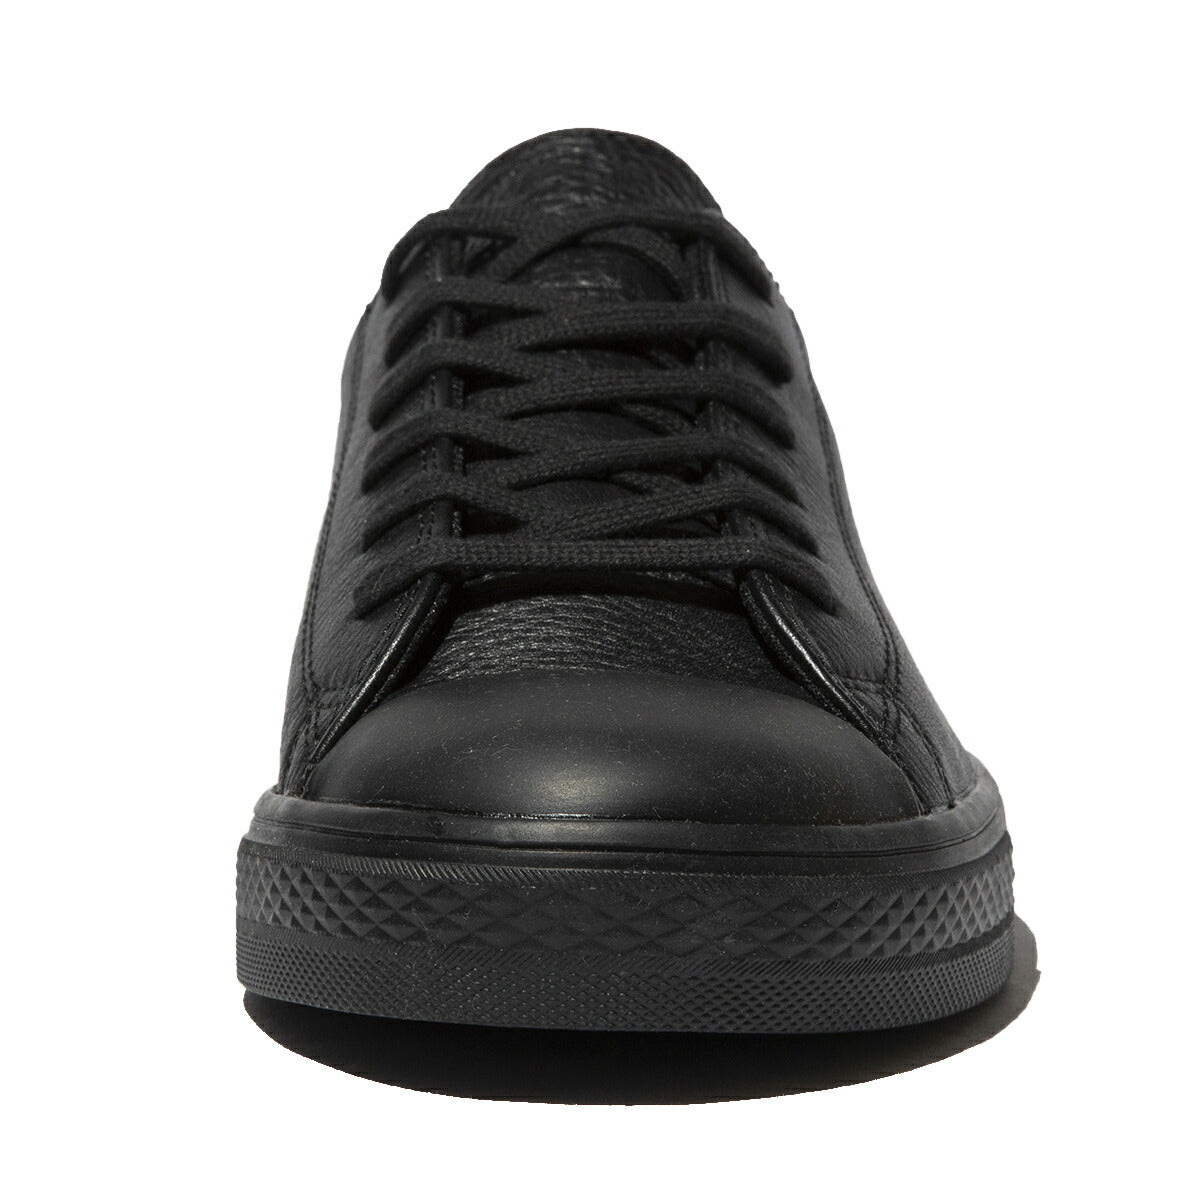 CONVERSE ALL STAR COUPE GORE-TEX OX